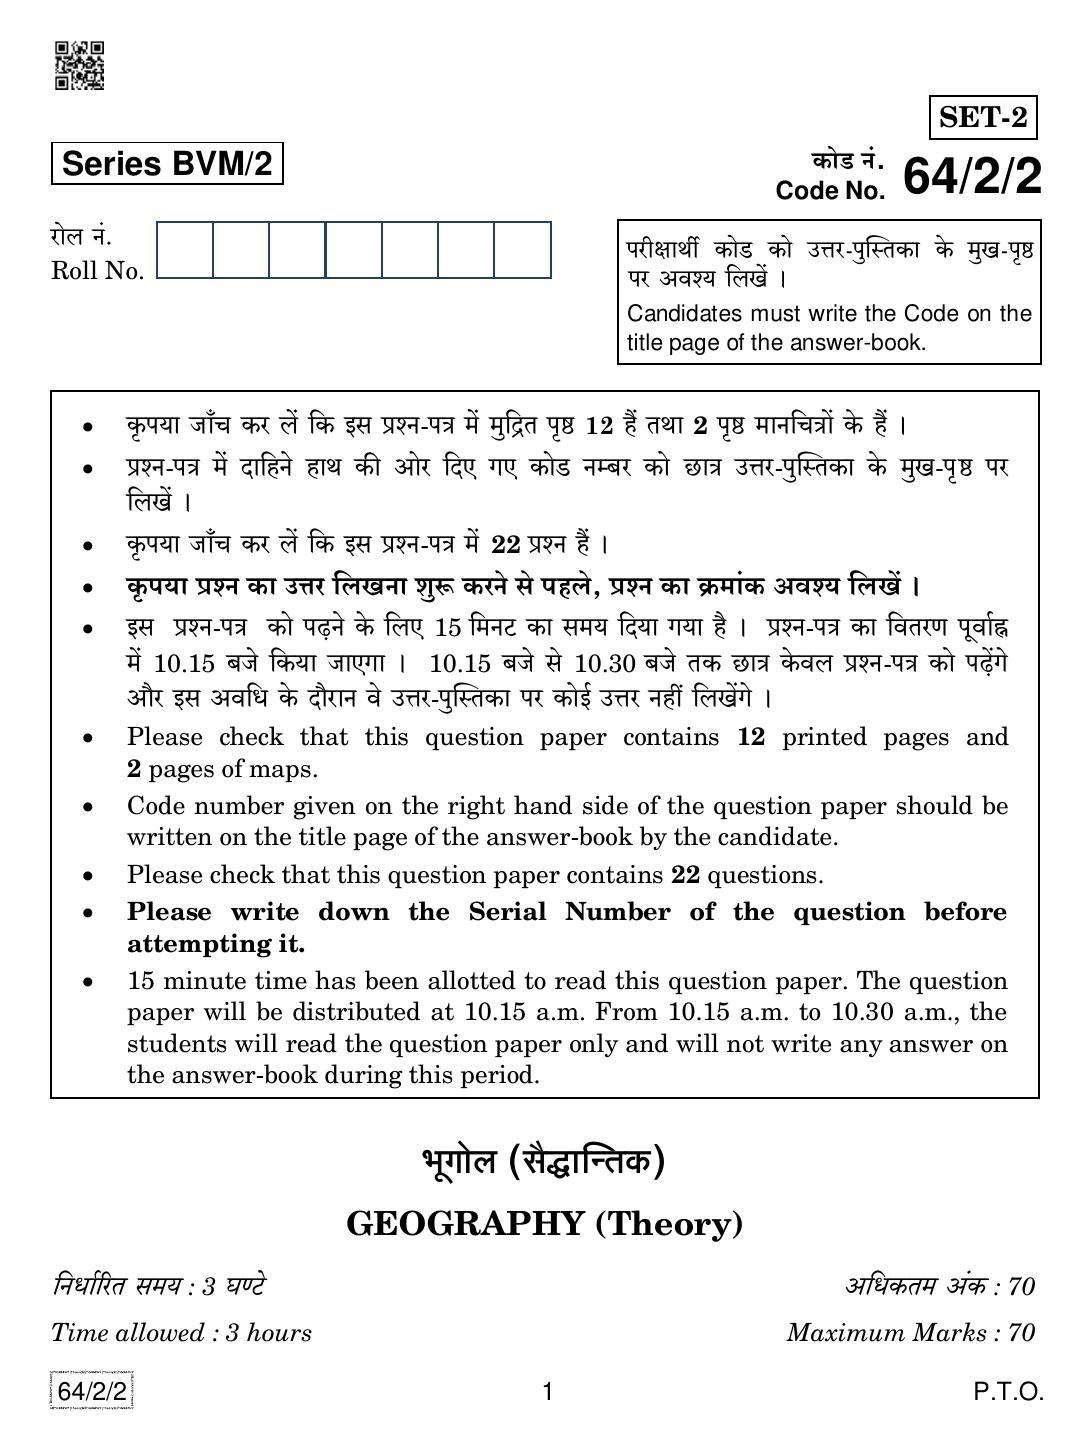 CBSE Class 12 64-2-2 Geography 2019 Question Paper - Page 1